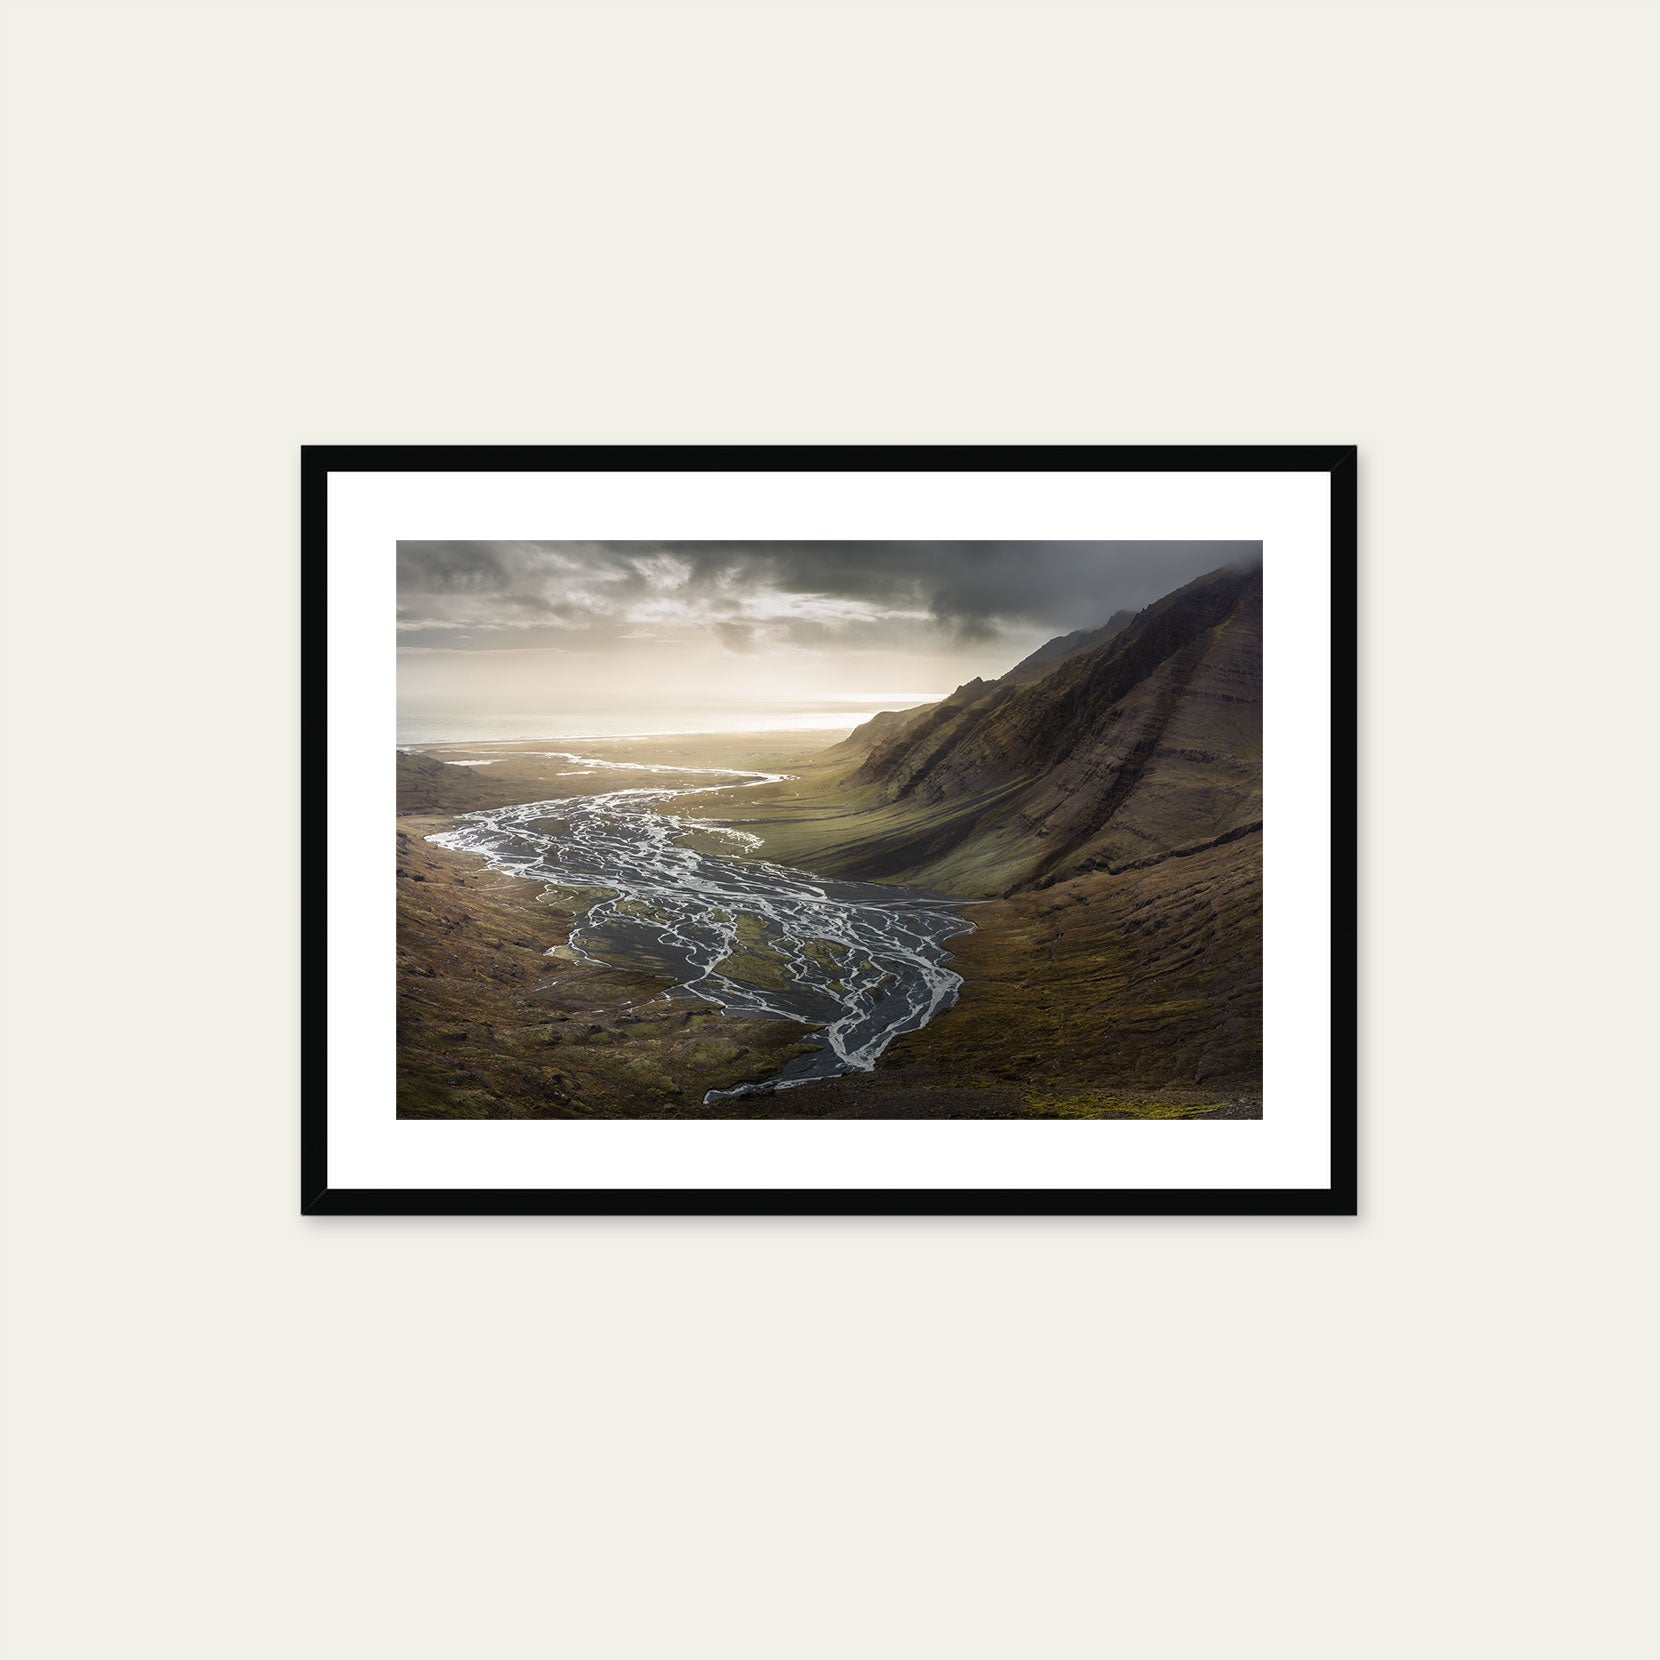 A black framed print of a valley in the south of Iceland